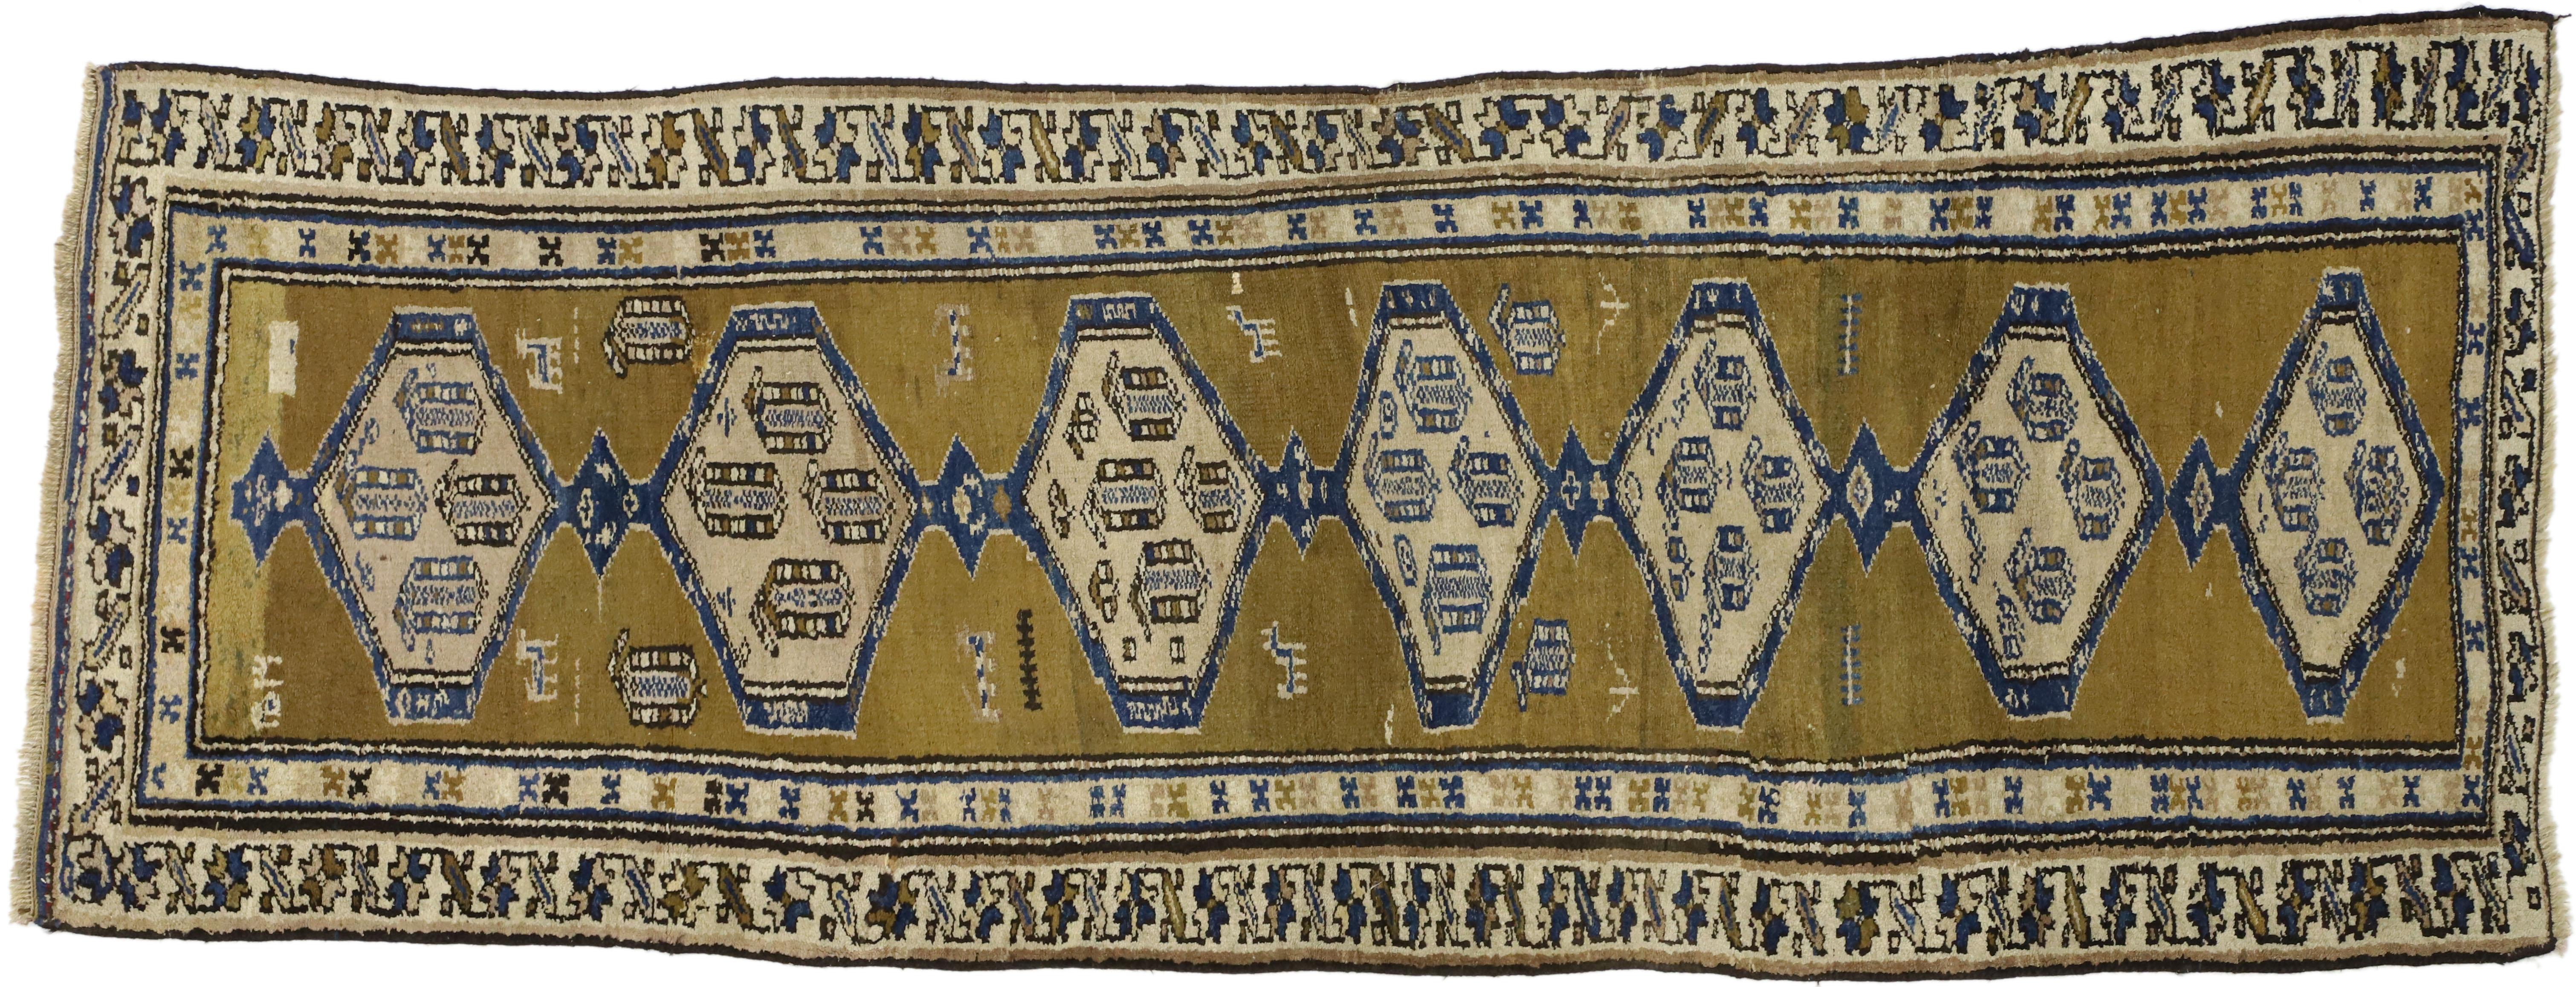 73198 Antique Sarab Persian Runner with Modern Tribal Style. This captivating antique Sarab Persian runner with modern tribal style features a warm composition highlighting its selection of high contrasting colors and rich waves of abrash. Seven